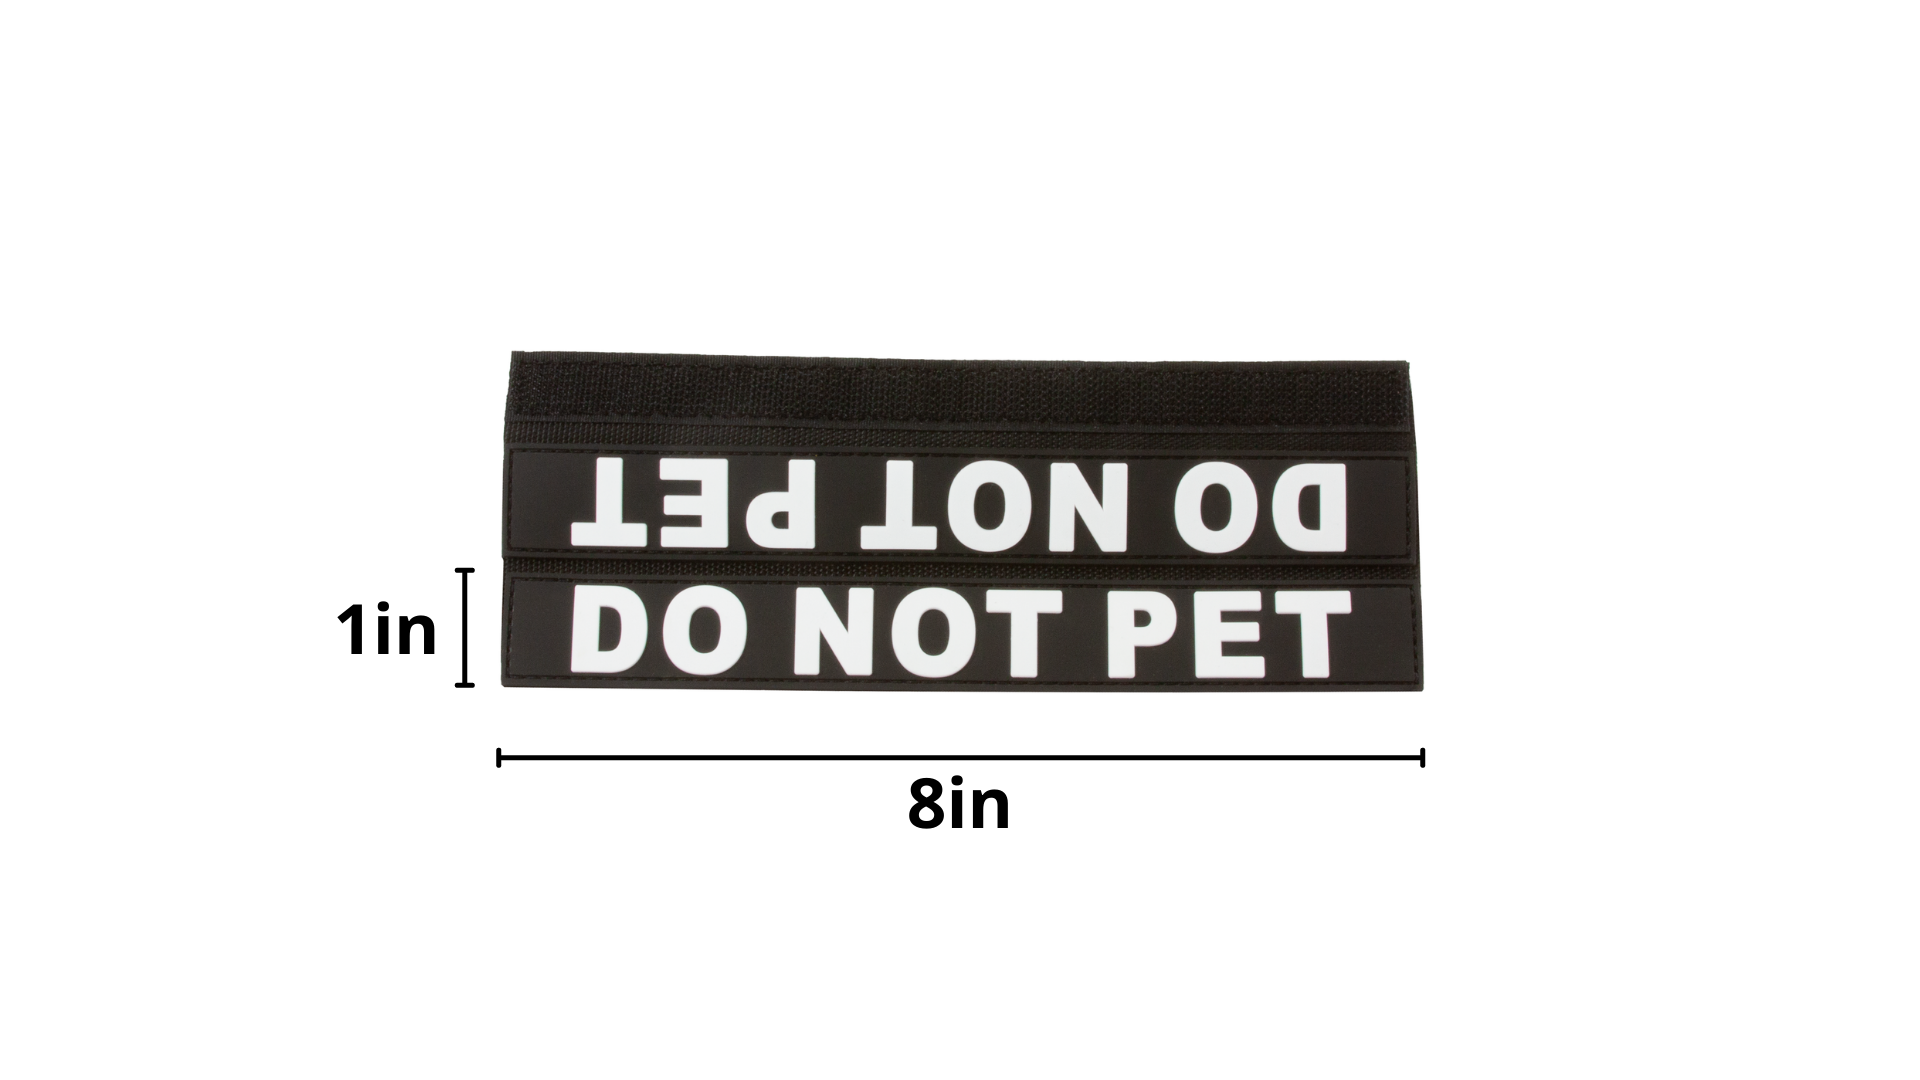 Do Not Pet dog leash sleeve, working dogs, reactive dogs, training dogs, dogs that need space.